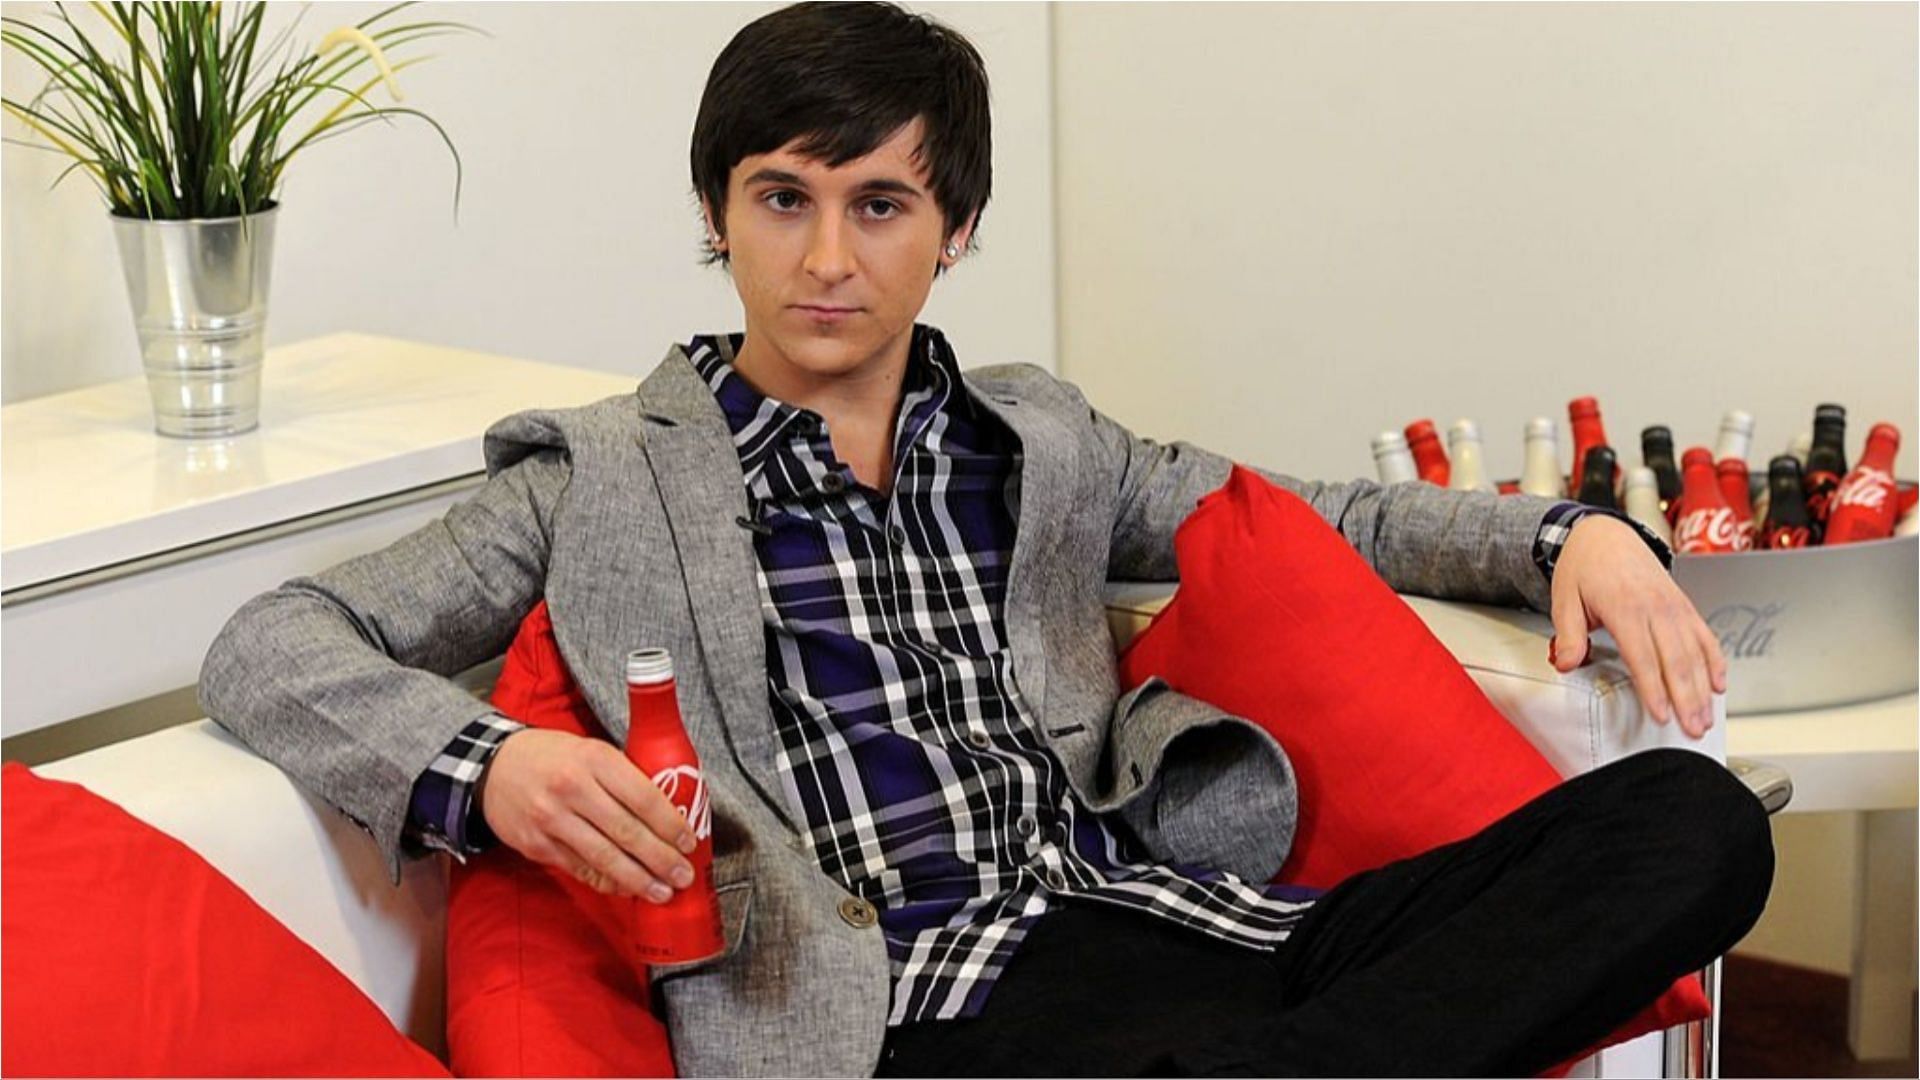 Mitchel Musso has earned a lot from his career (Image via Kevin Winter/Getty Images)